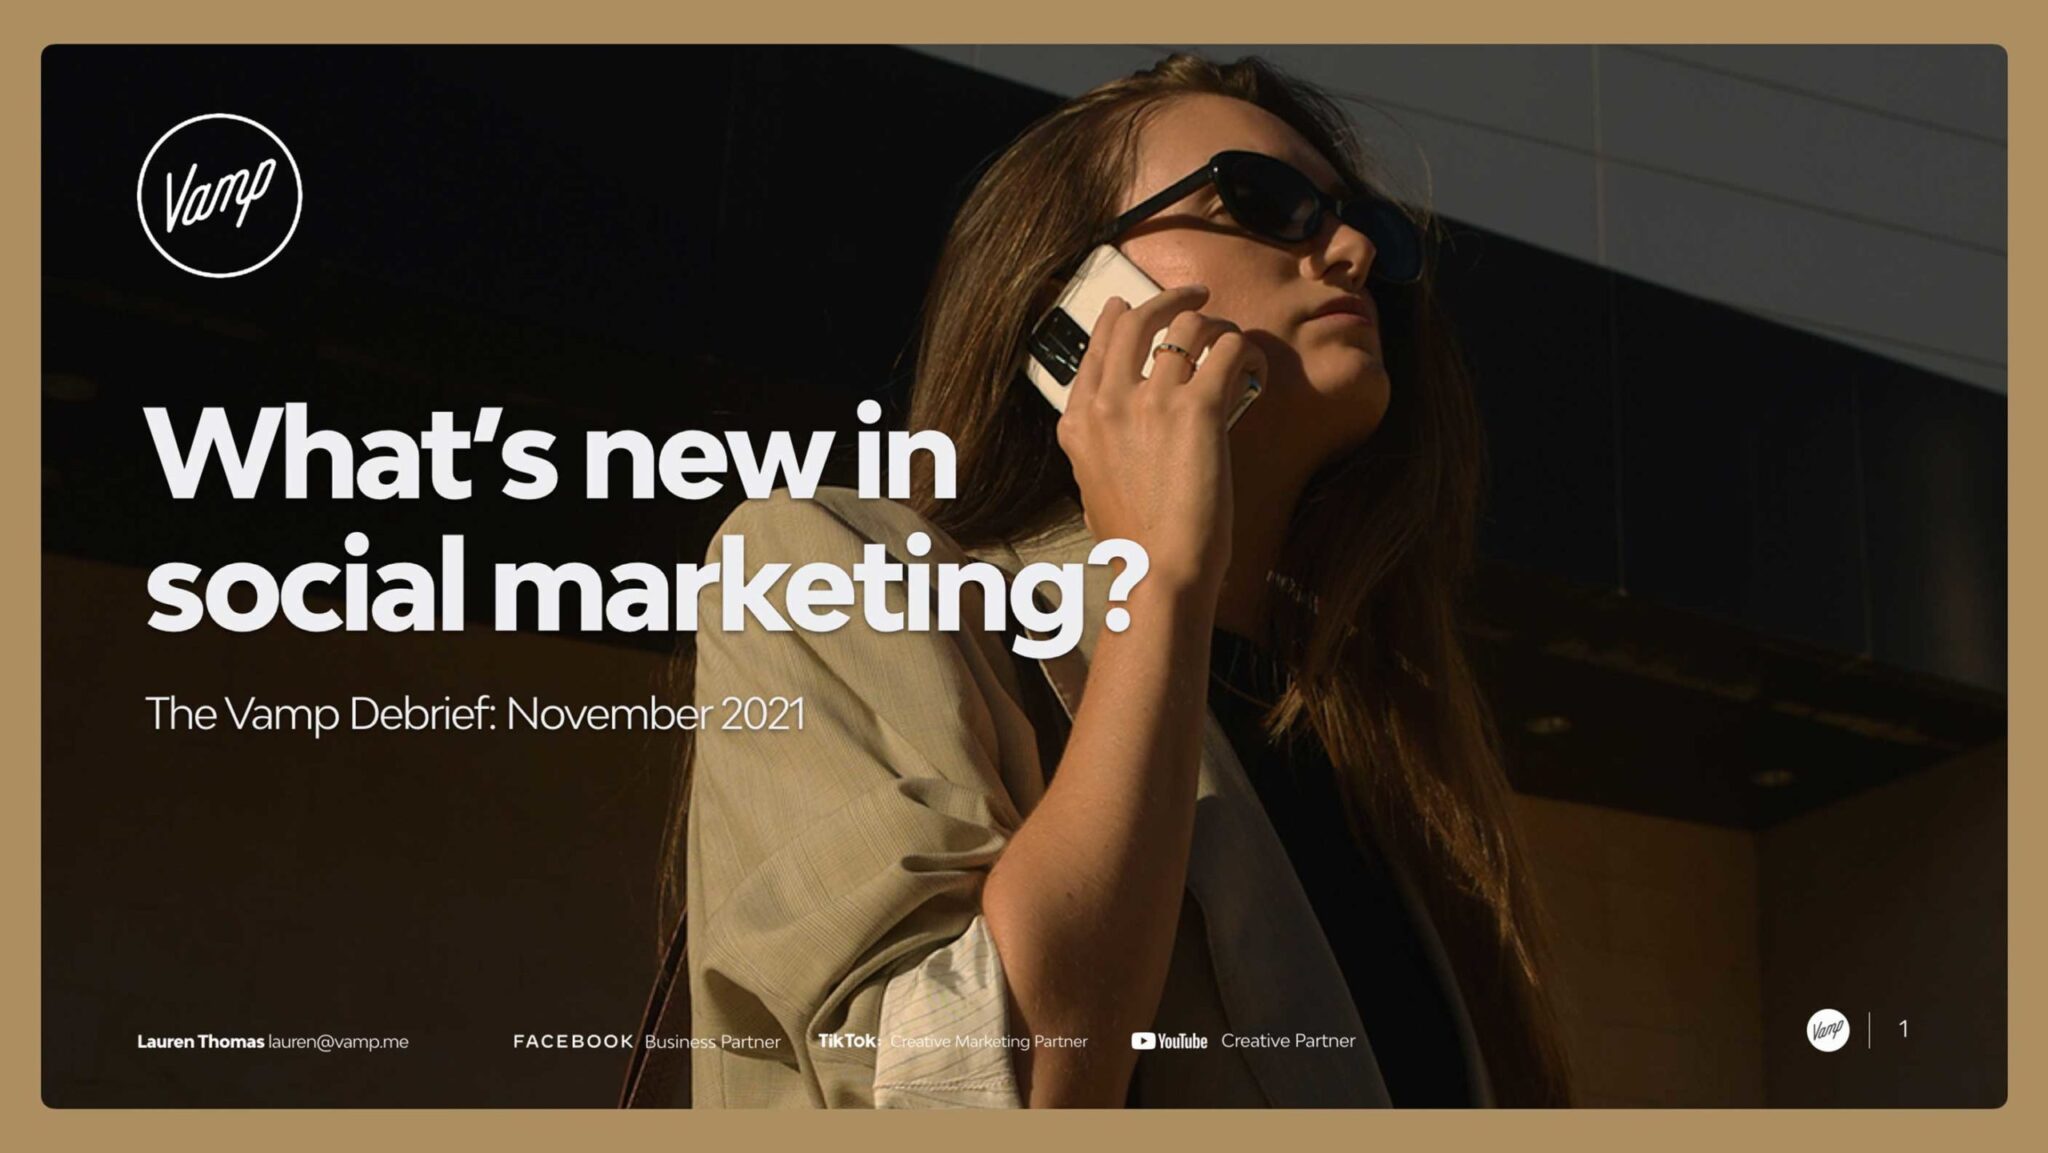 The Vamp Debrief What's new in social marketing this November?